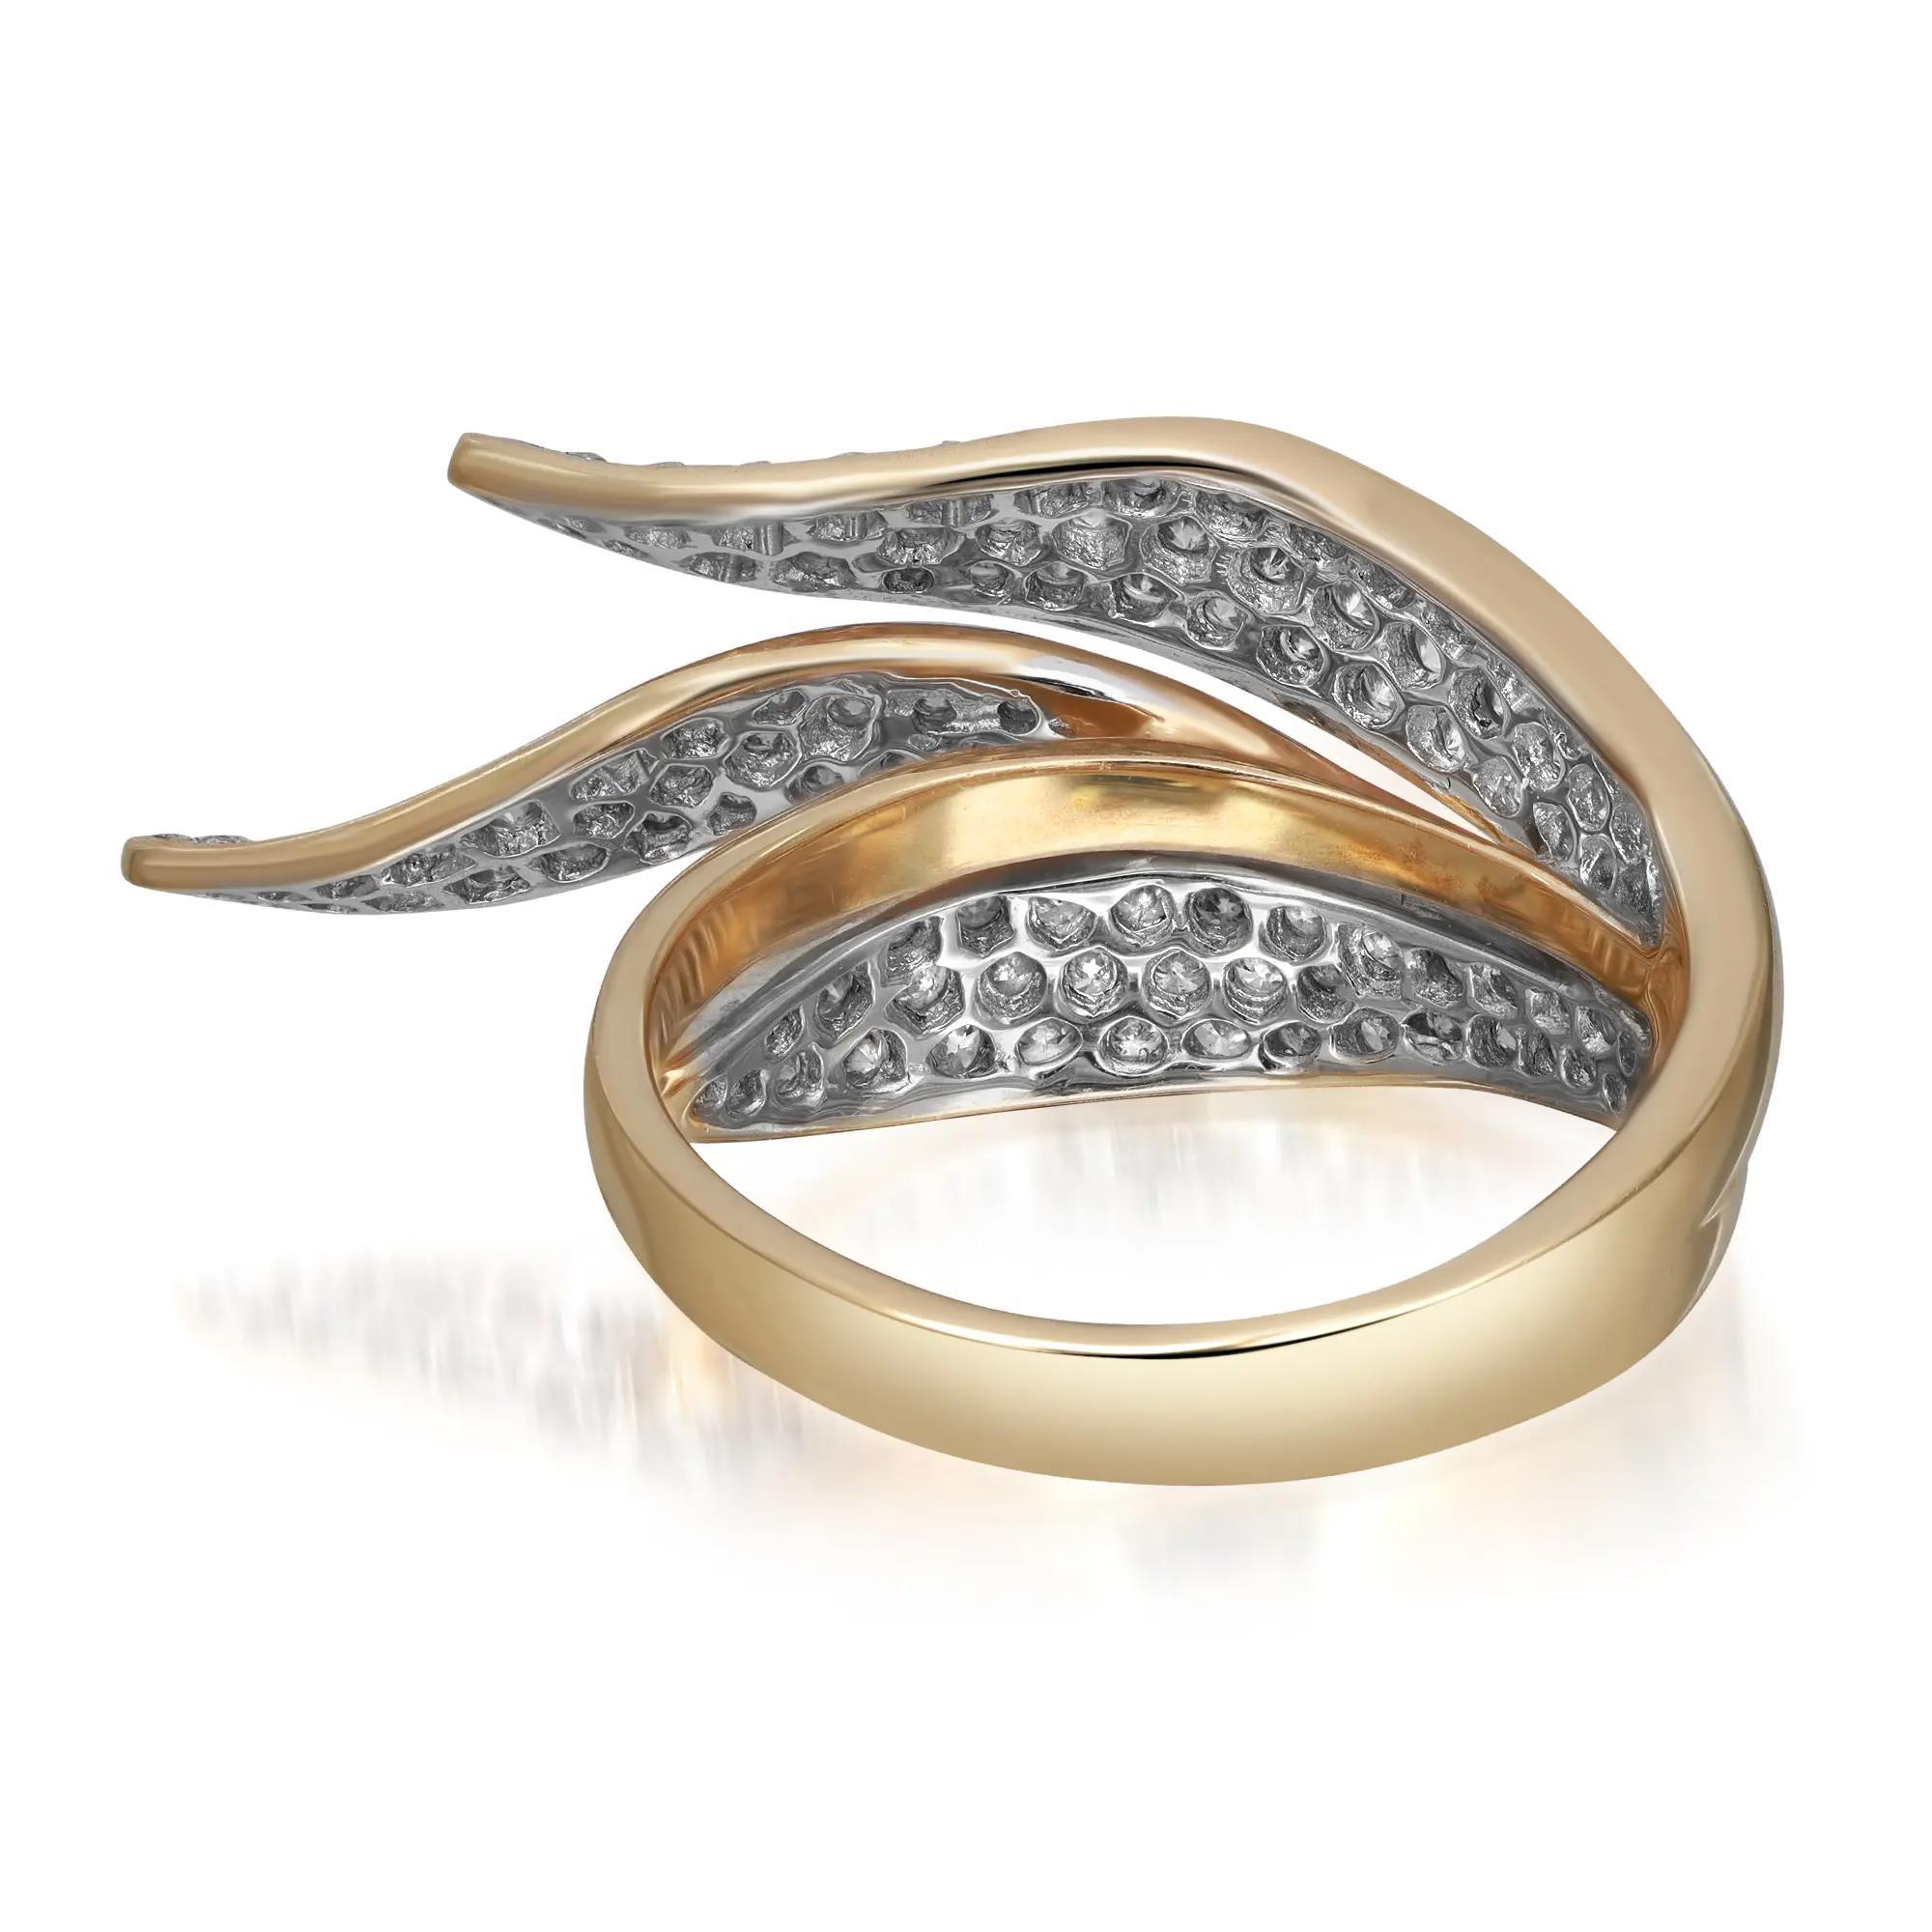 Modern 1.47Ctw Pave Set Round Cut Diamond Ladies Cocktail Ring 14K Yellow Gold Size 7.5 For Sale